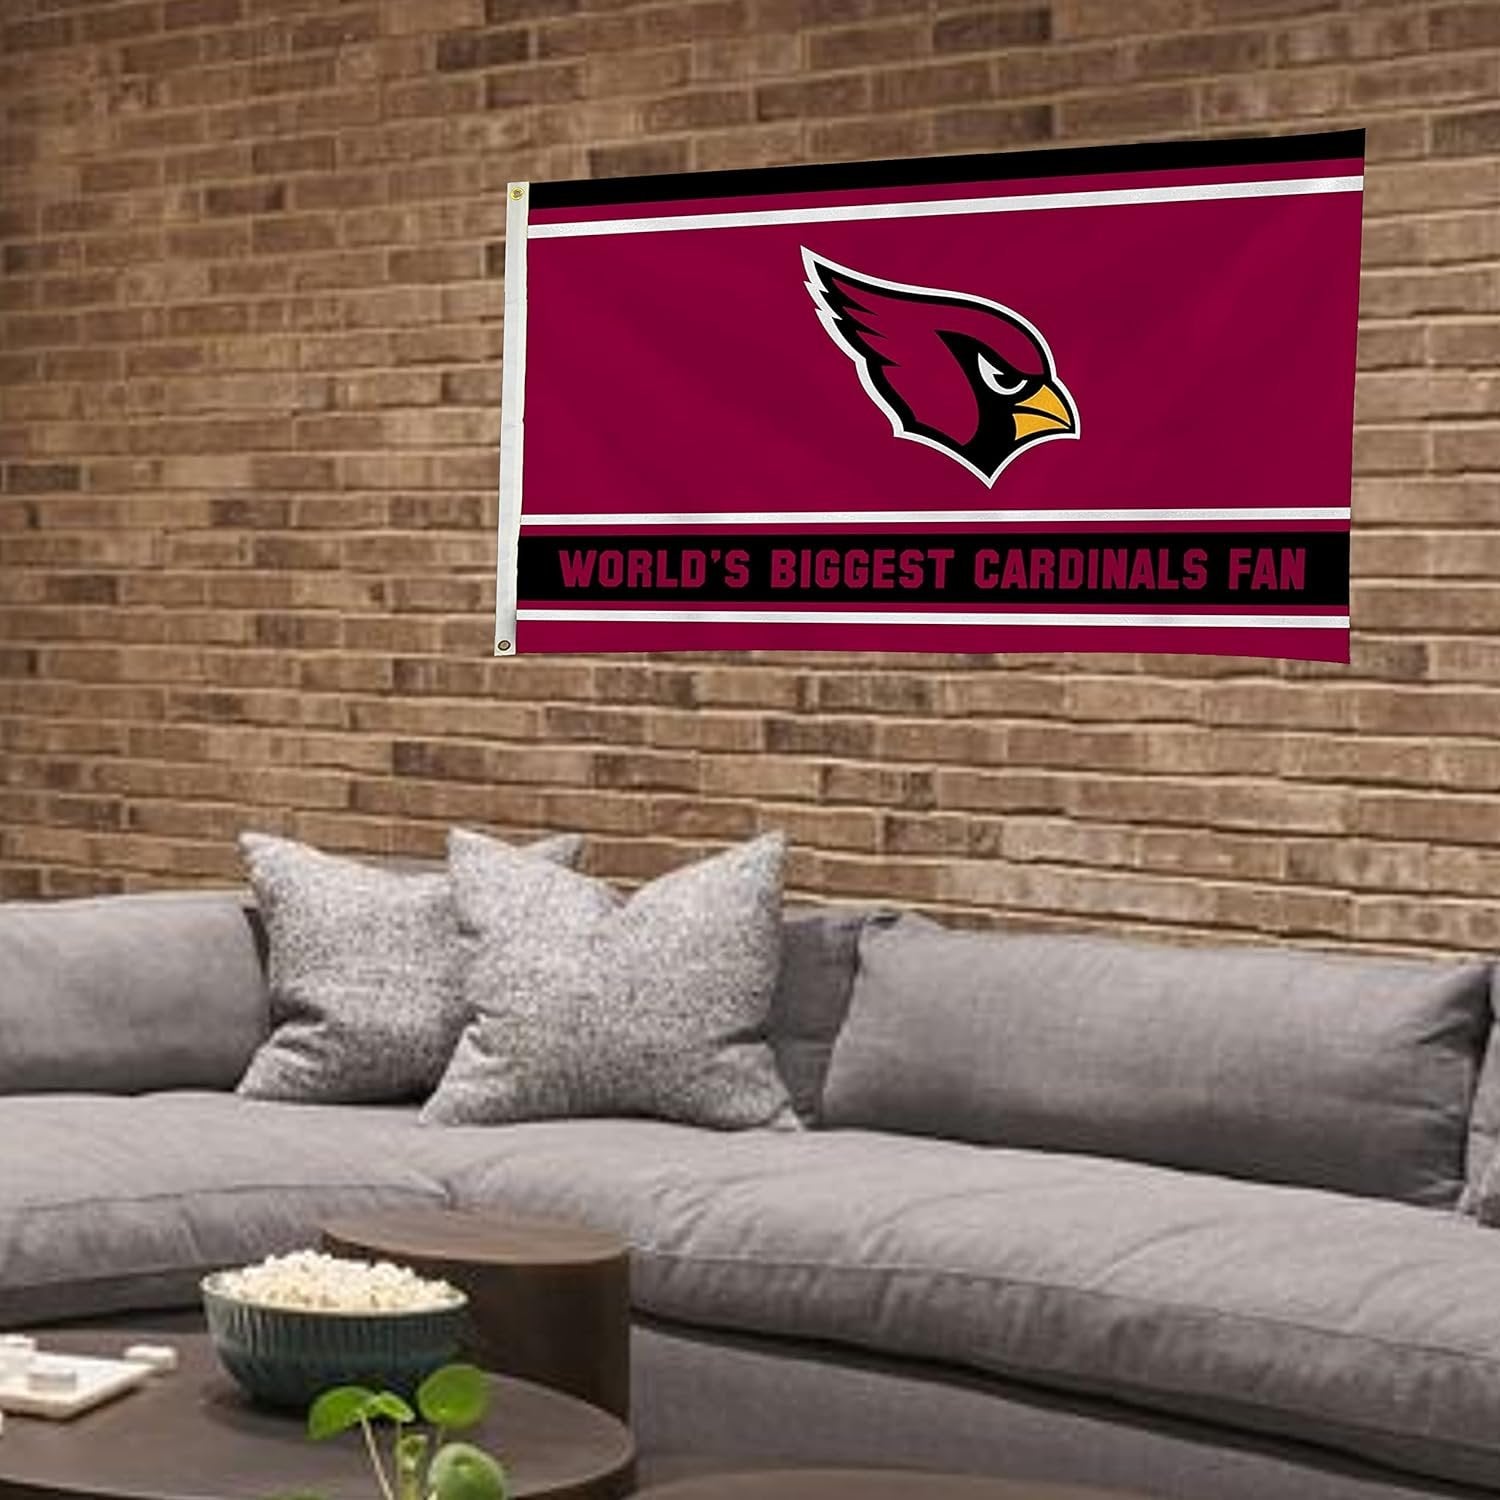 Arizona Cardinals 3x5 Feet Flag Banner, World's Biggest Fan, Metal Grommets, Single Sided, Indoor or Outdoor Use